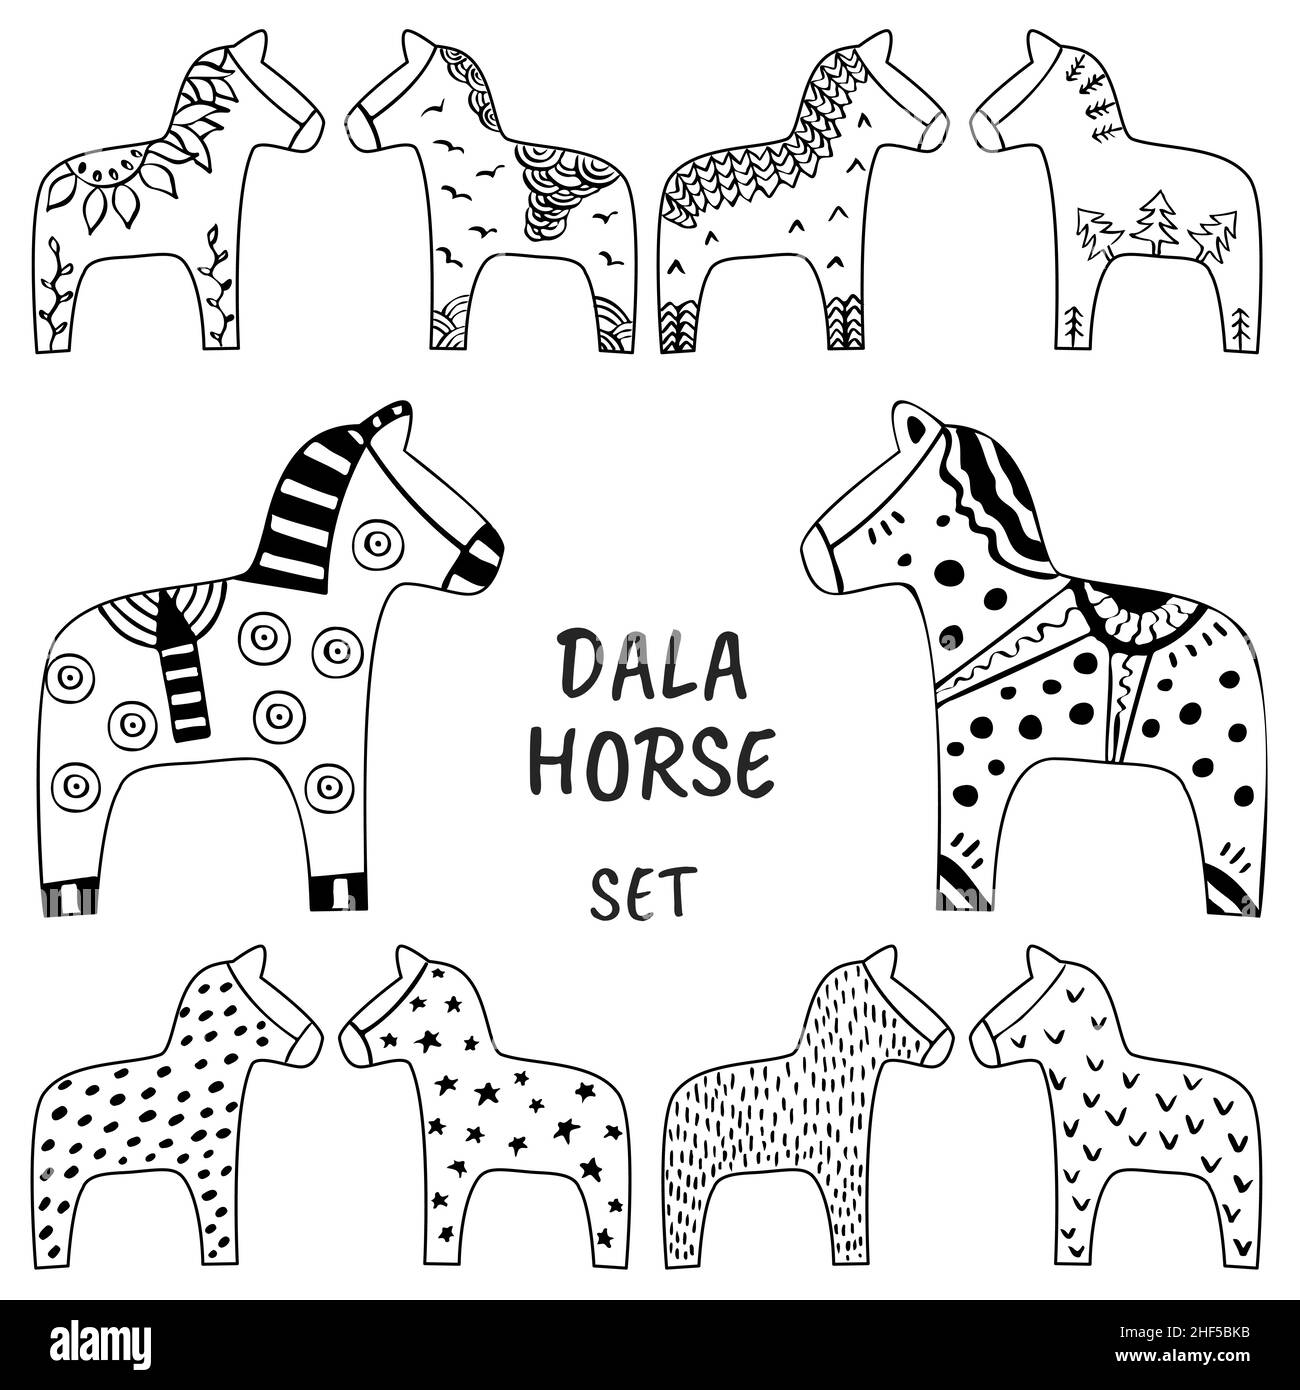 Dala horses set. Ink hand drawn sketch of traditional Swedish Dalarna horse scandinavian style minimalistic outline for cards, tourism related design vector illustration Stock Vector